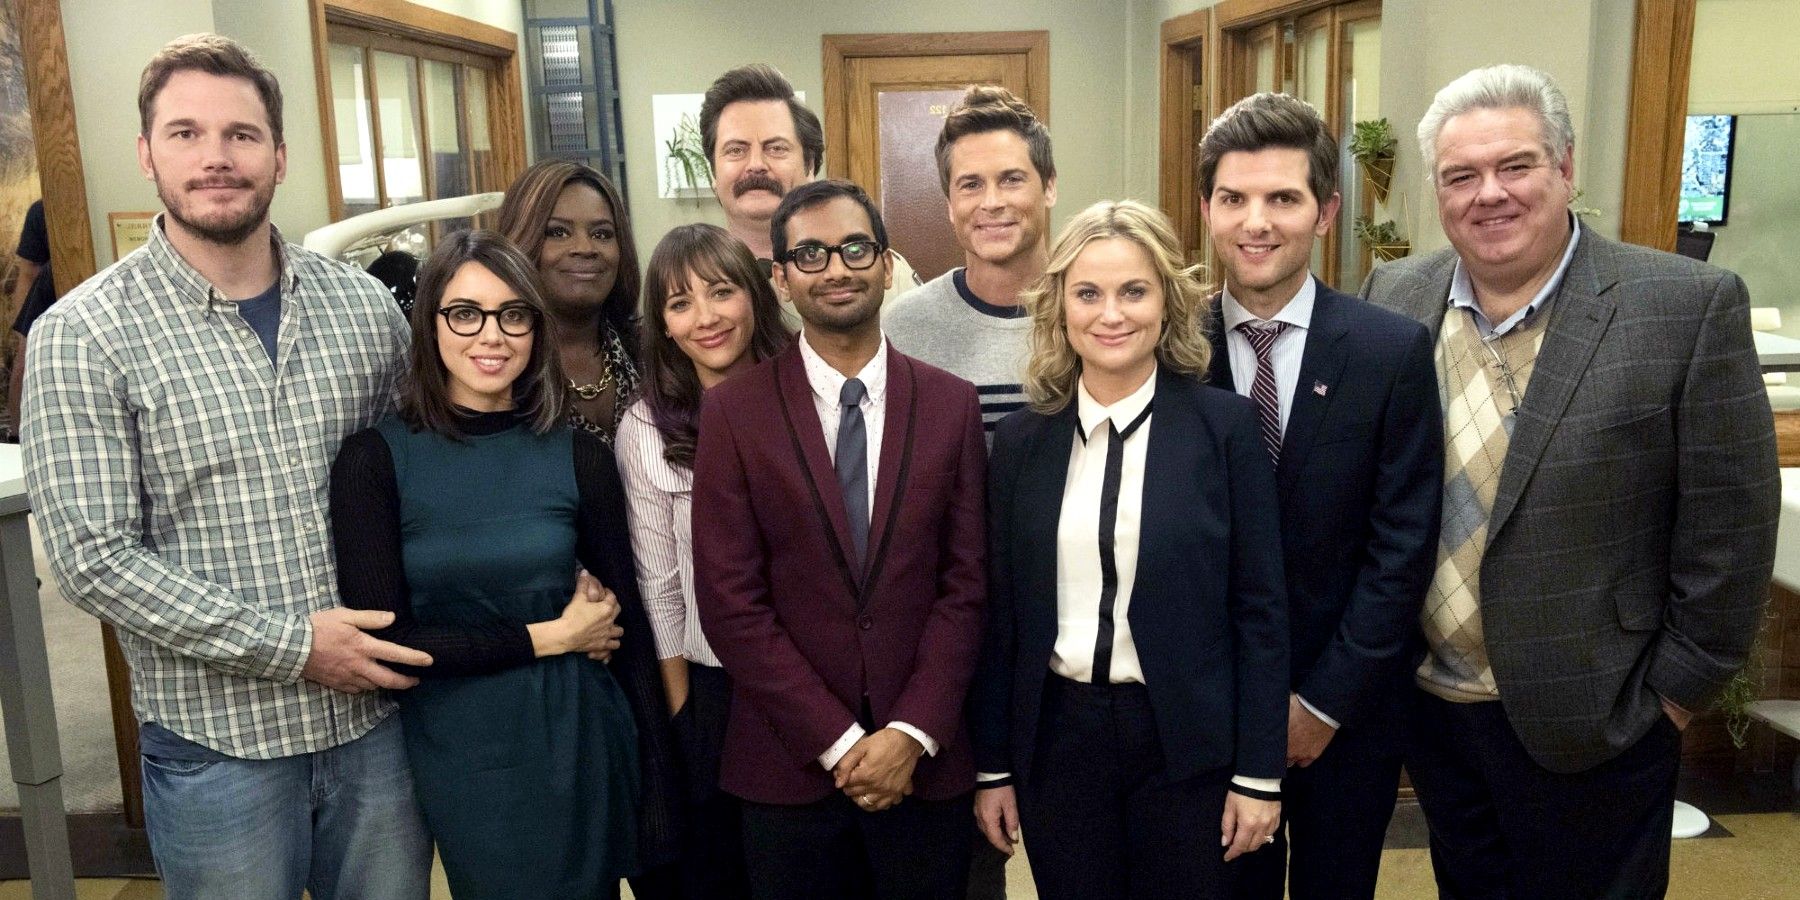 Parks and Recreation finale reunion